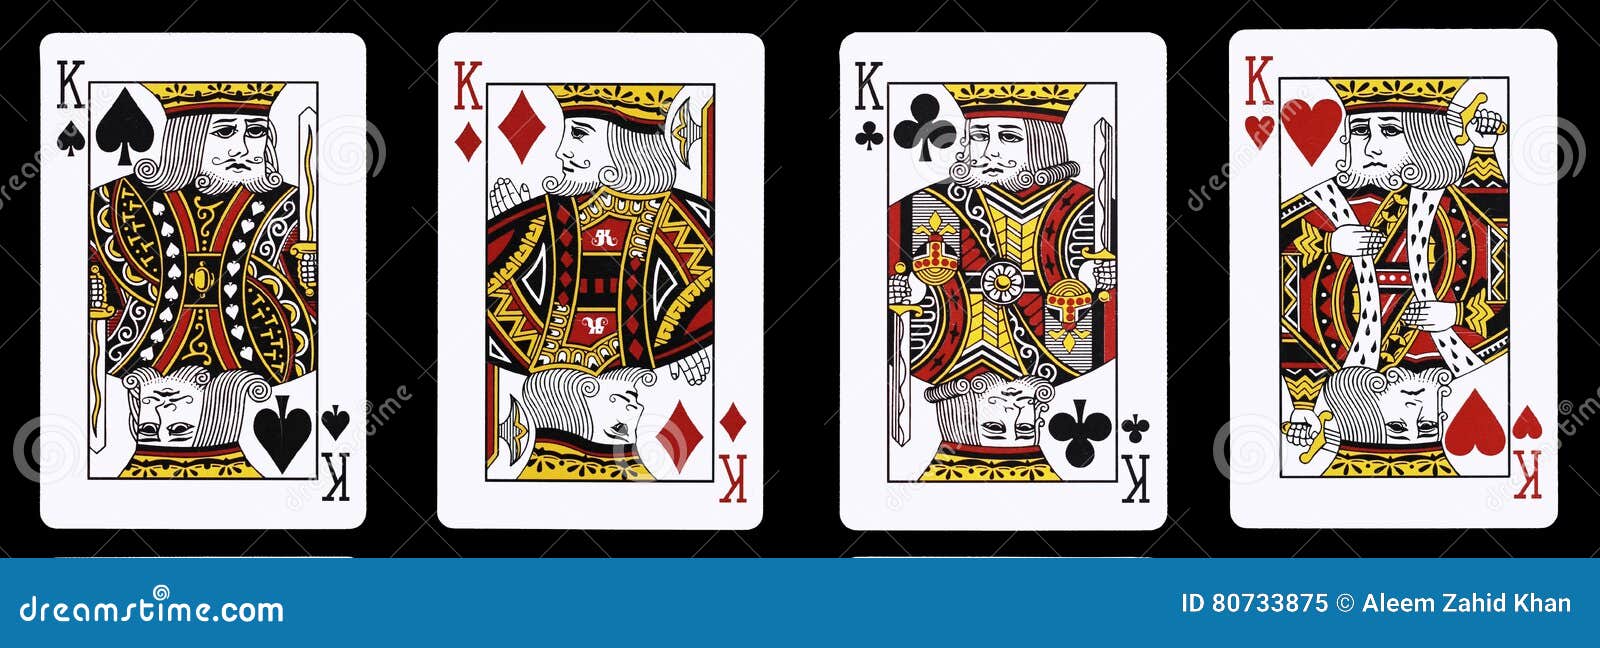 4 kings in a row - playing cards